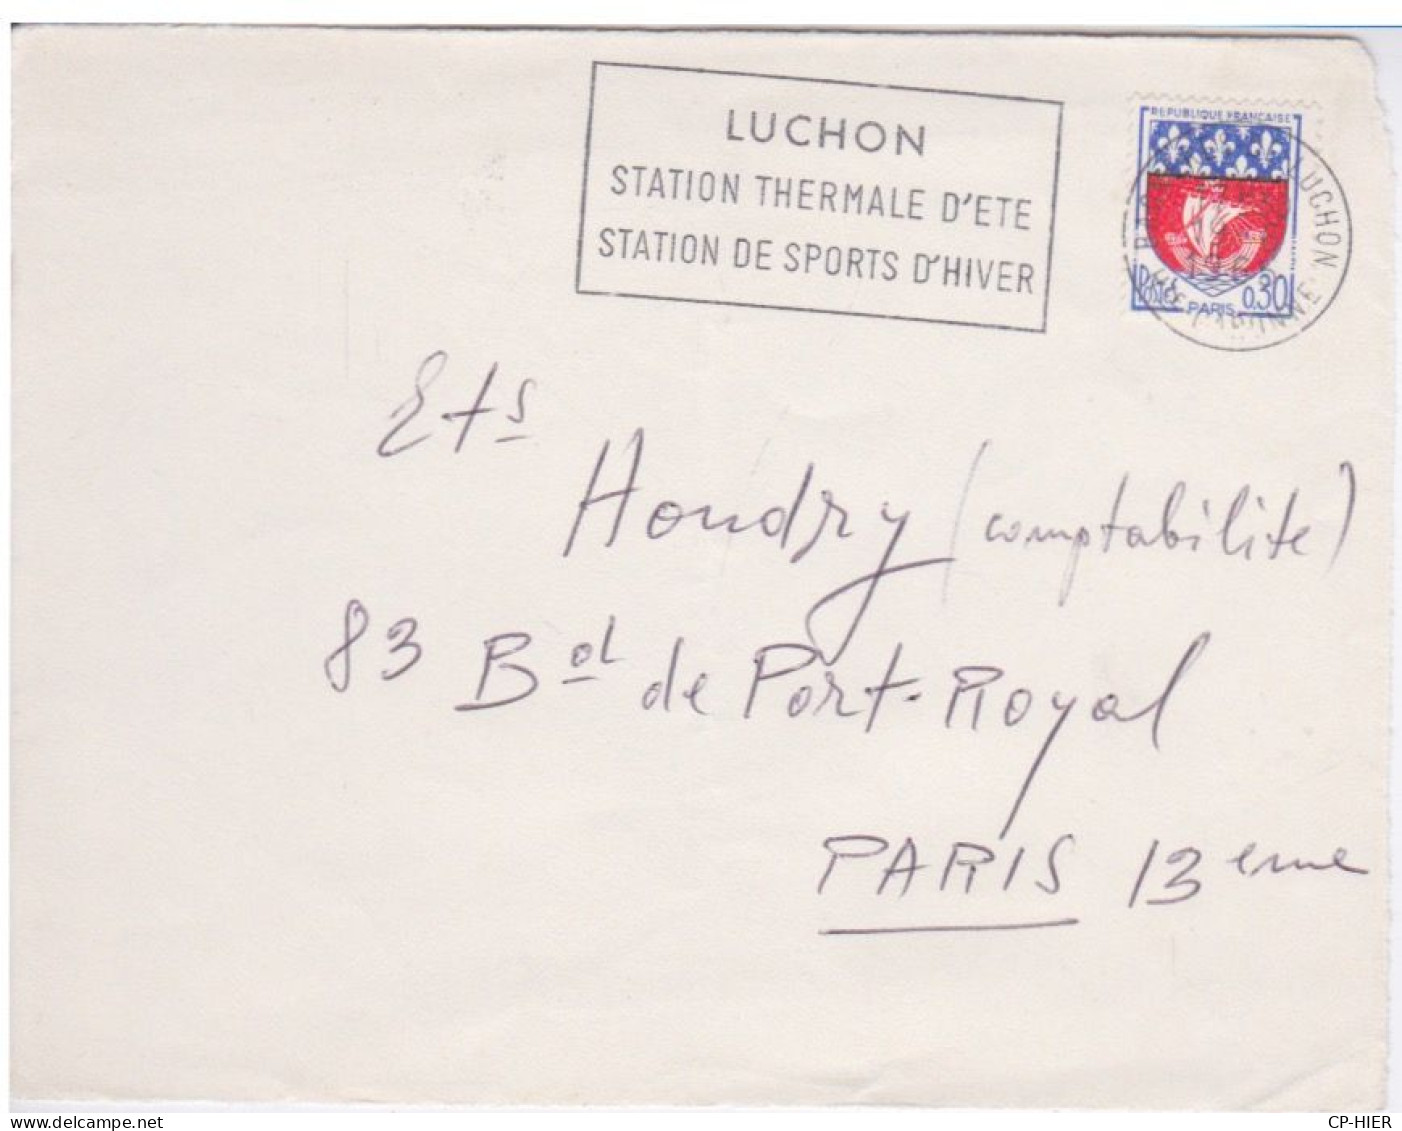 FRANCE - FLAMME LUCHON - STATION THERMALE D'ETE - STATION SPORTS D'HIVER - Mechanical Postmarks (Advertisement)